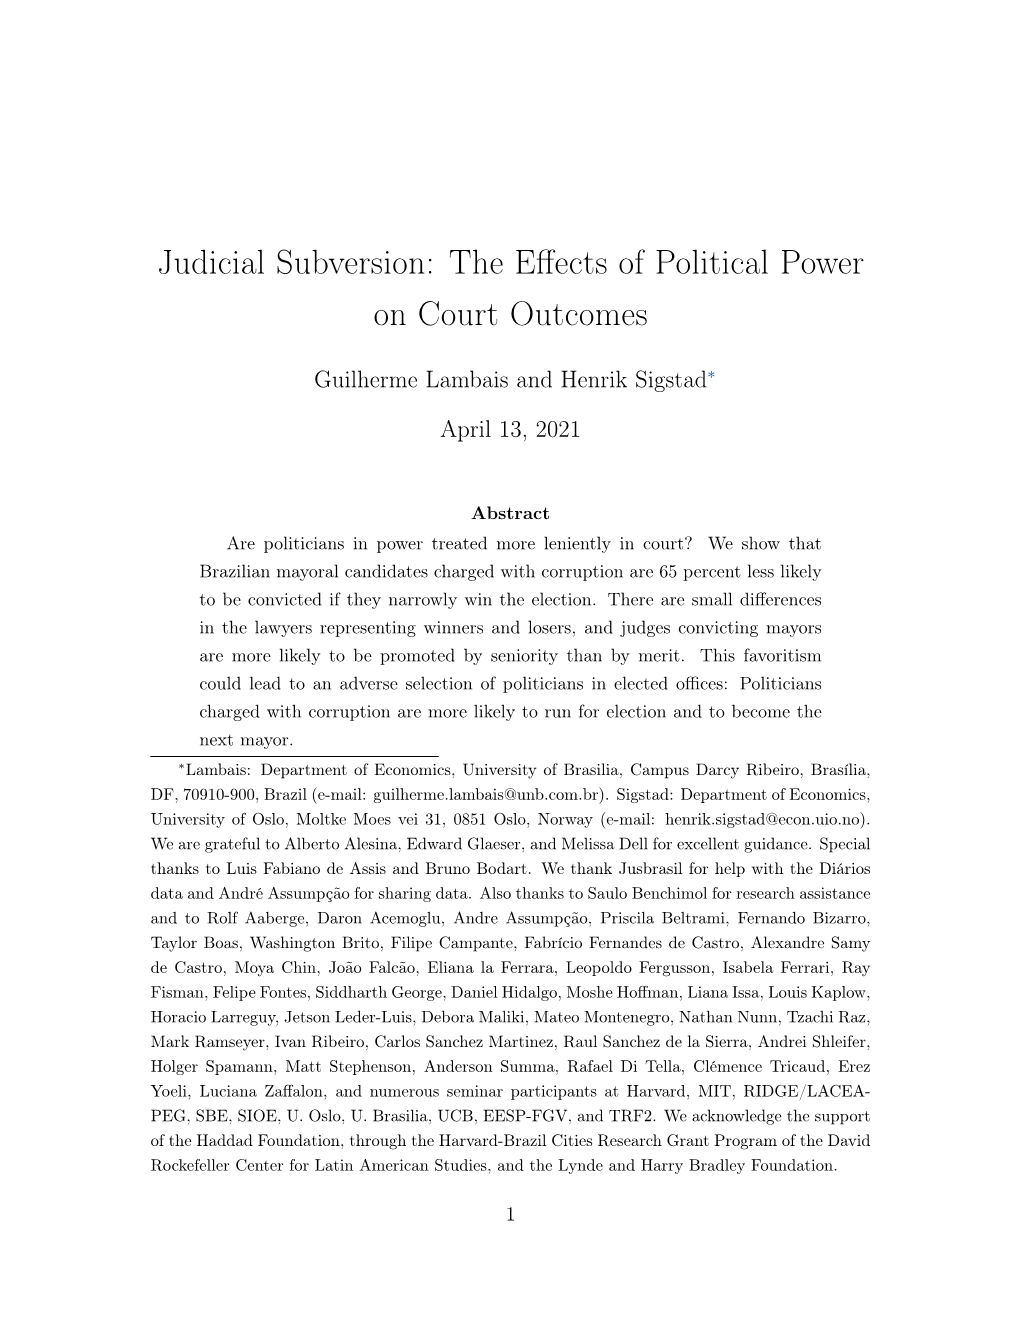 Judicial Subversion: the Eﬀects of Political Power on Court Outcomes